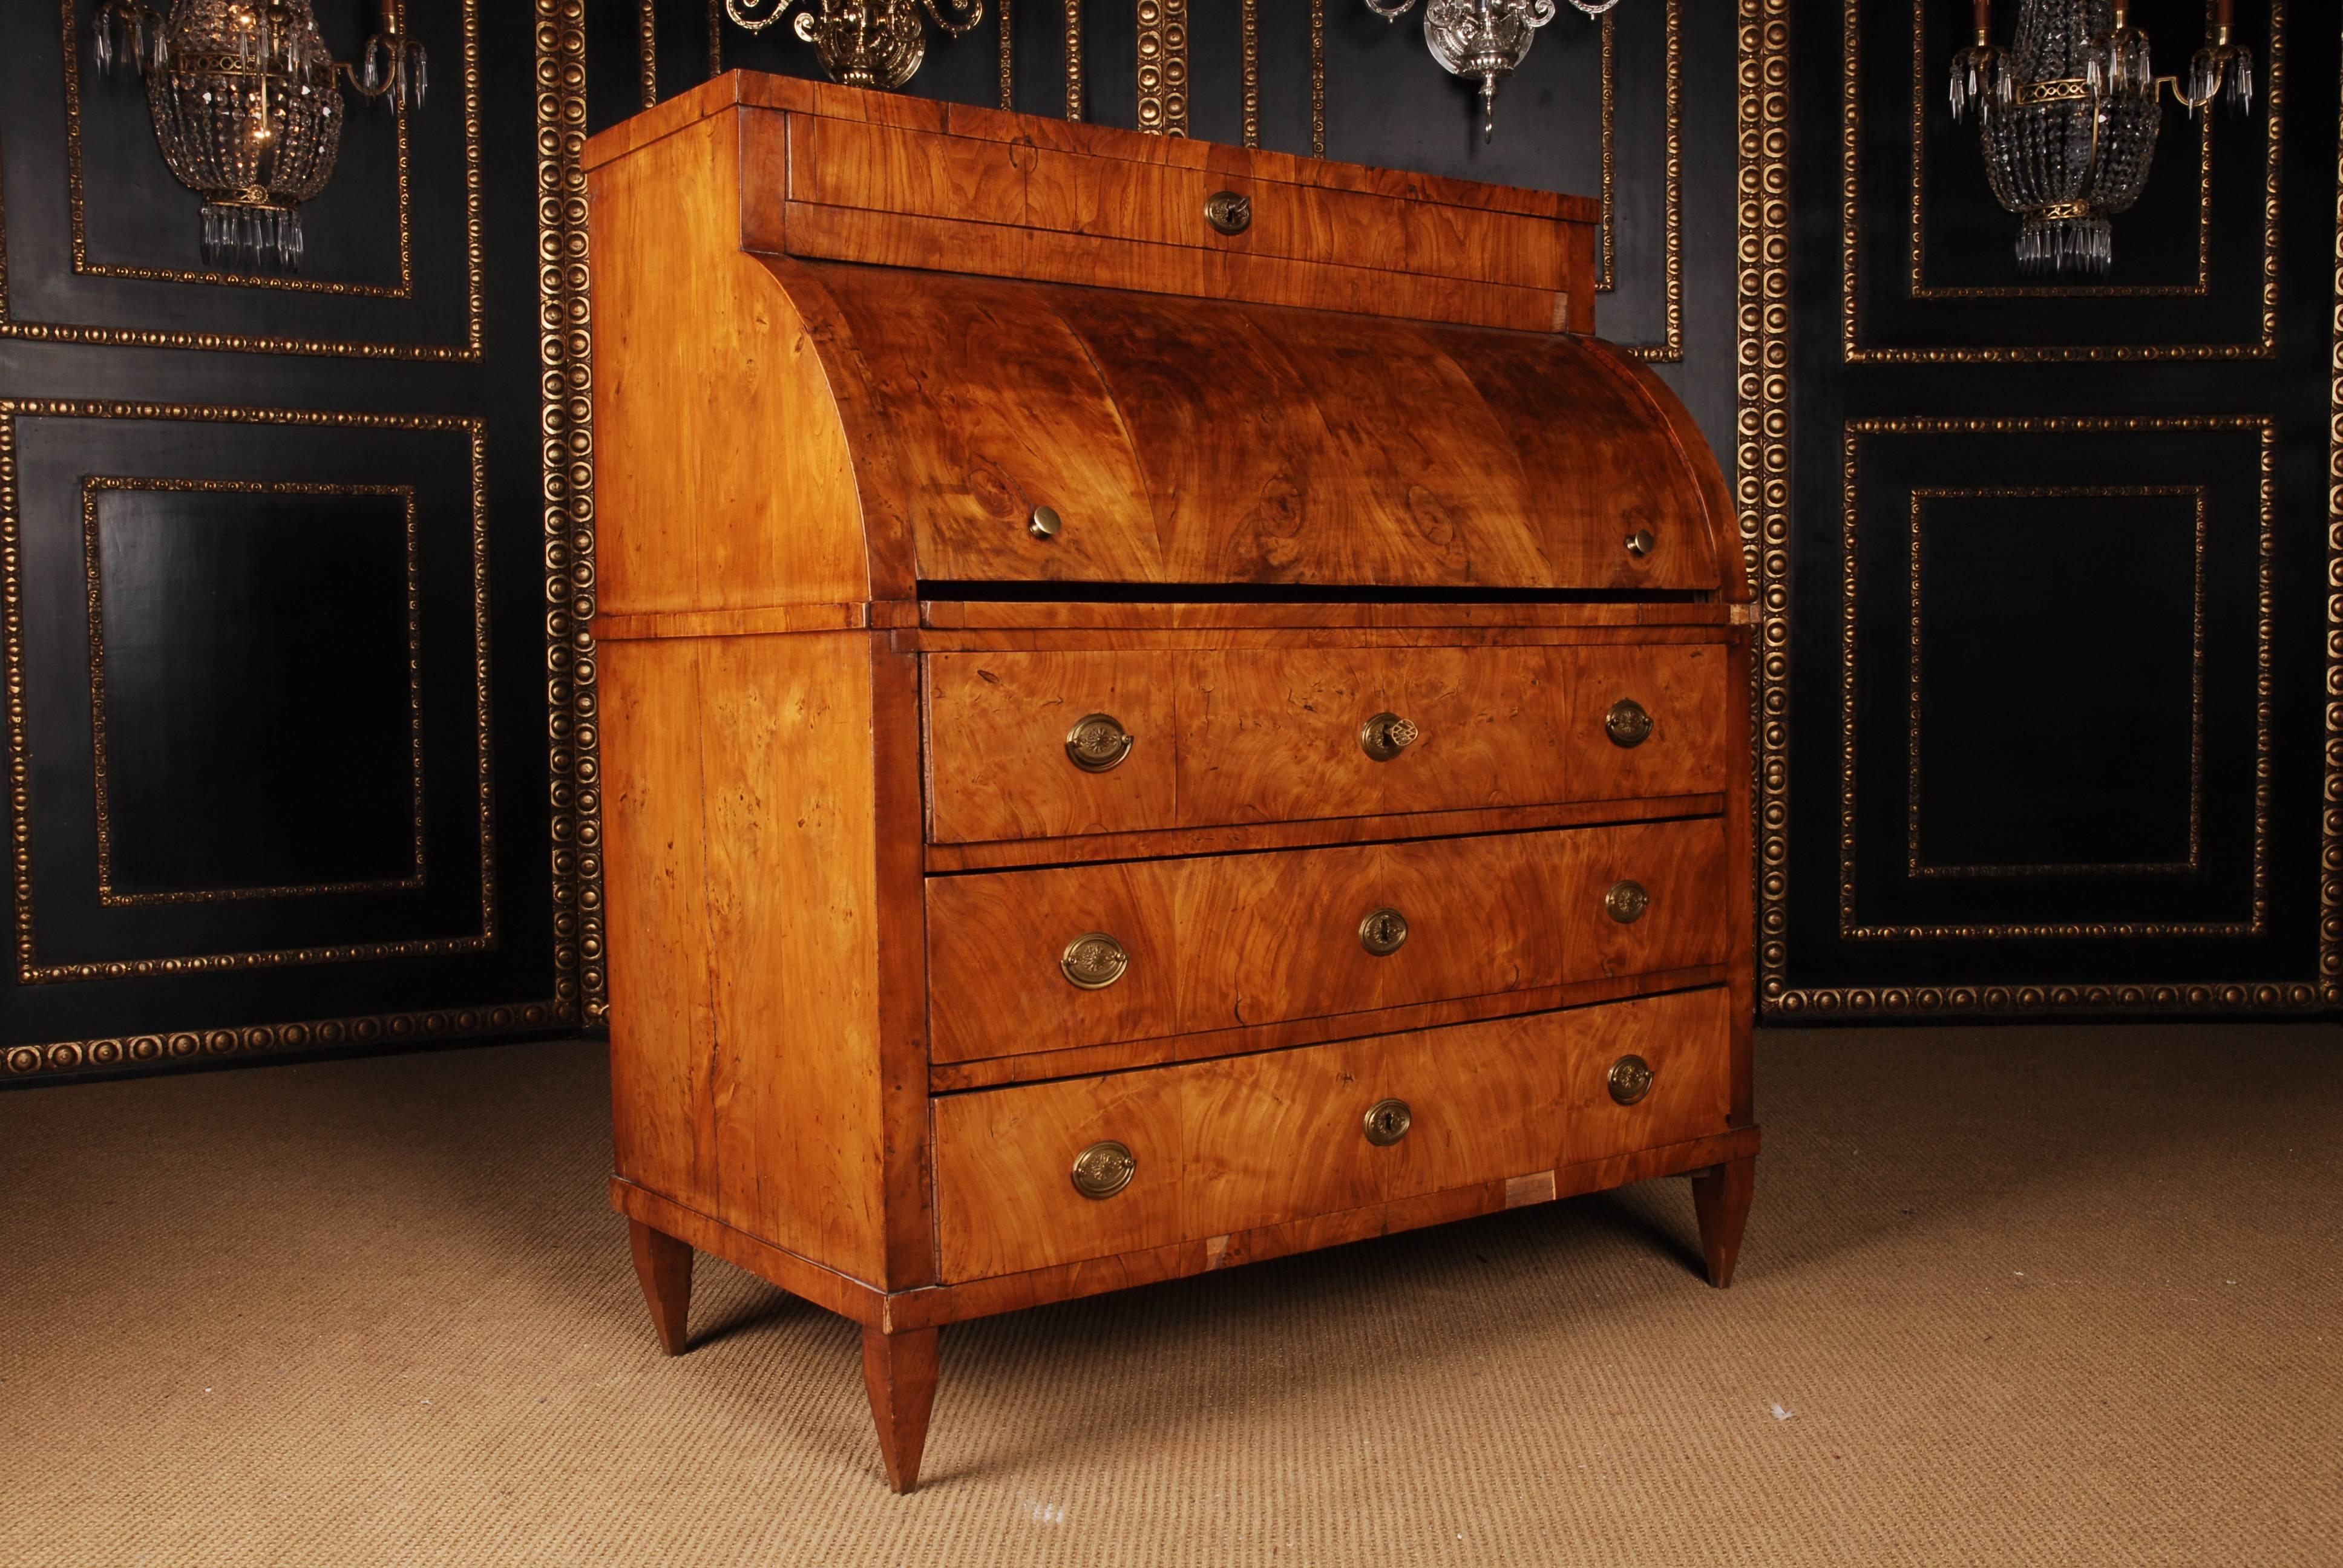 2 mm thick cherry veneer on solid pine. High-corpuscular body. Bottom front view three drawers, overwriting cylinder with pull-out writing surface. Behind office division. Top drawer back.

A good historical condition with a beautiful warm patina.